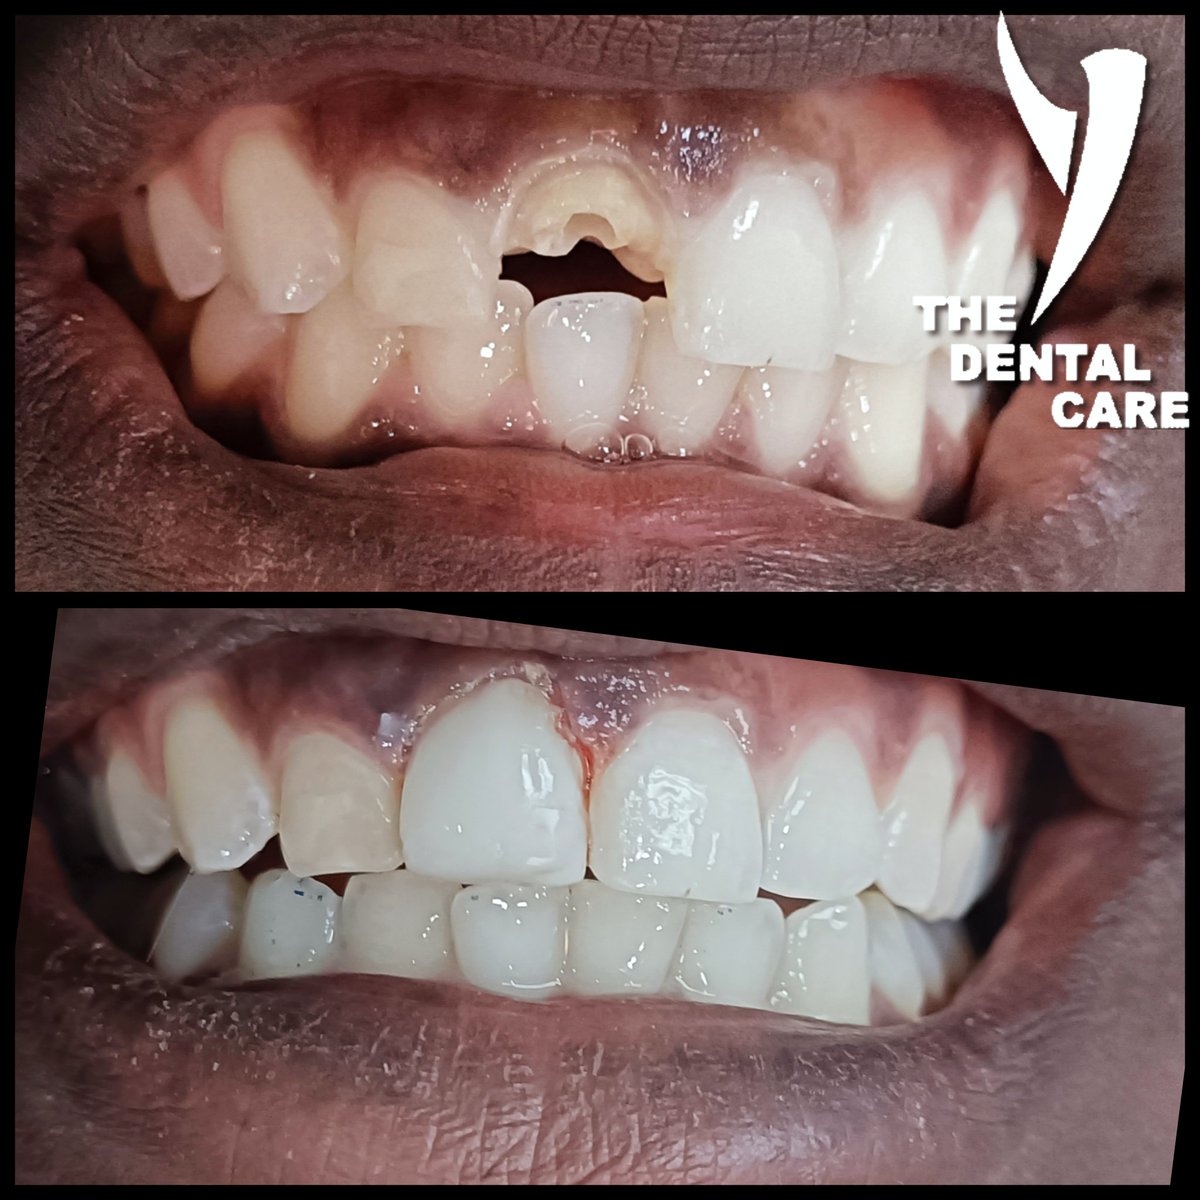 'Bring back your smile with our professional dental care! 😁✨ Schedule an appointment today and let us help you achieve your perfect smile! #dentalcare #smile #oralhealth'sekodental.co.za